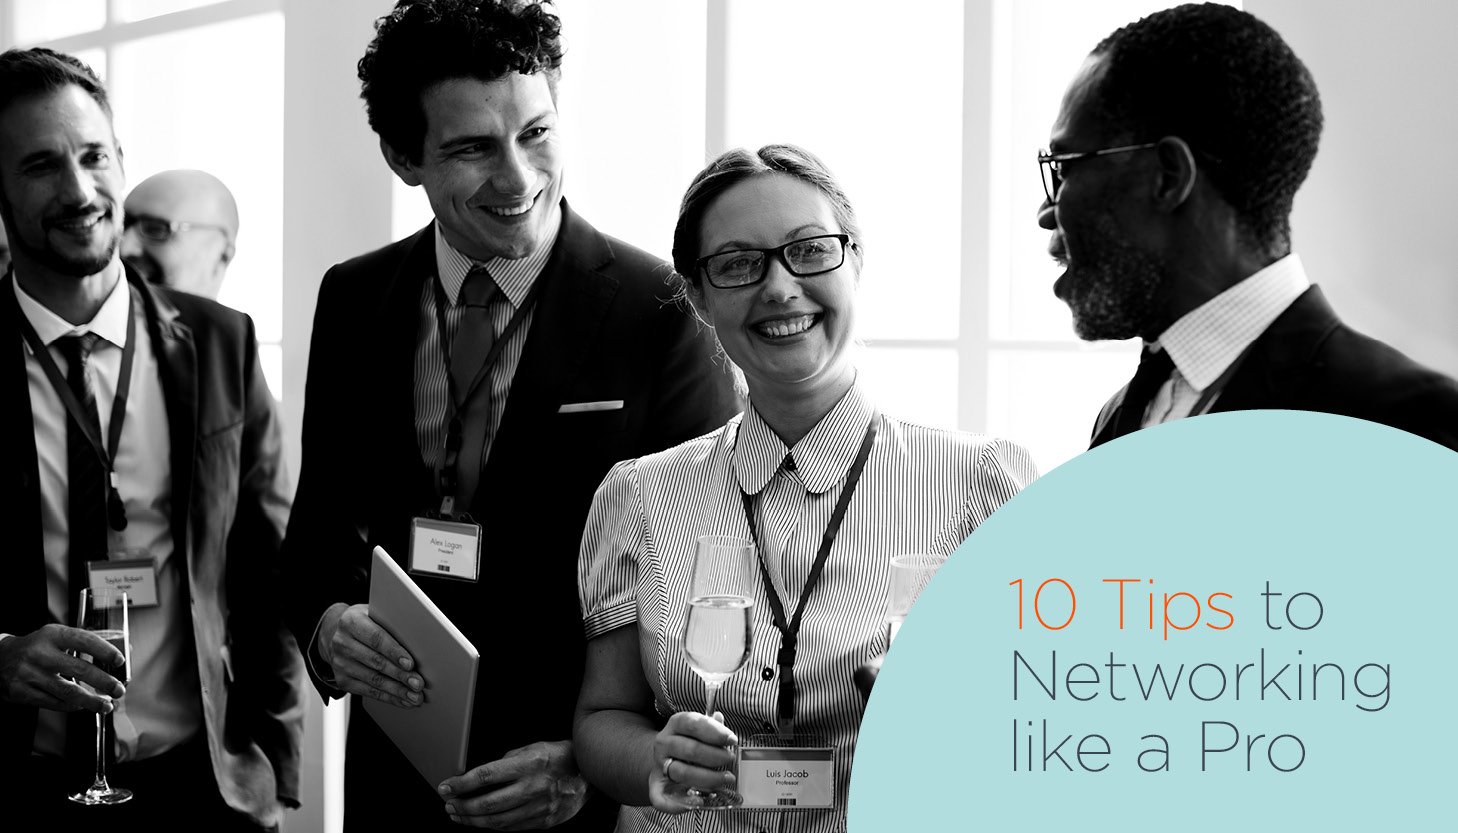 10 Tips to Networking like a Pro